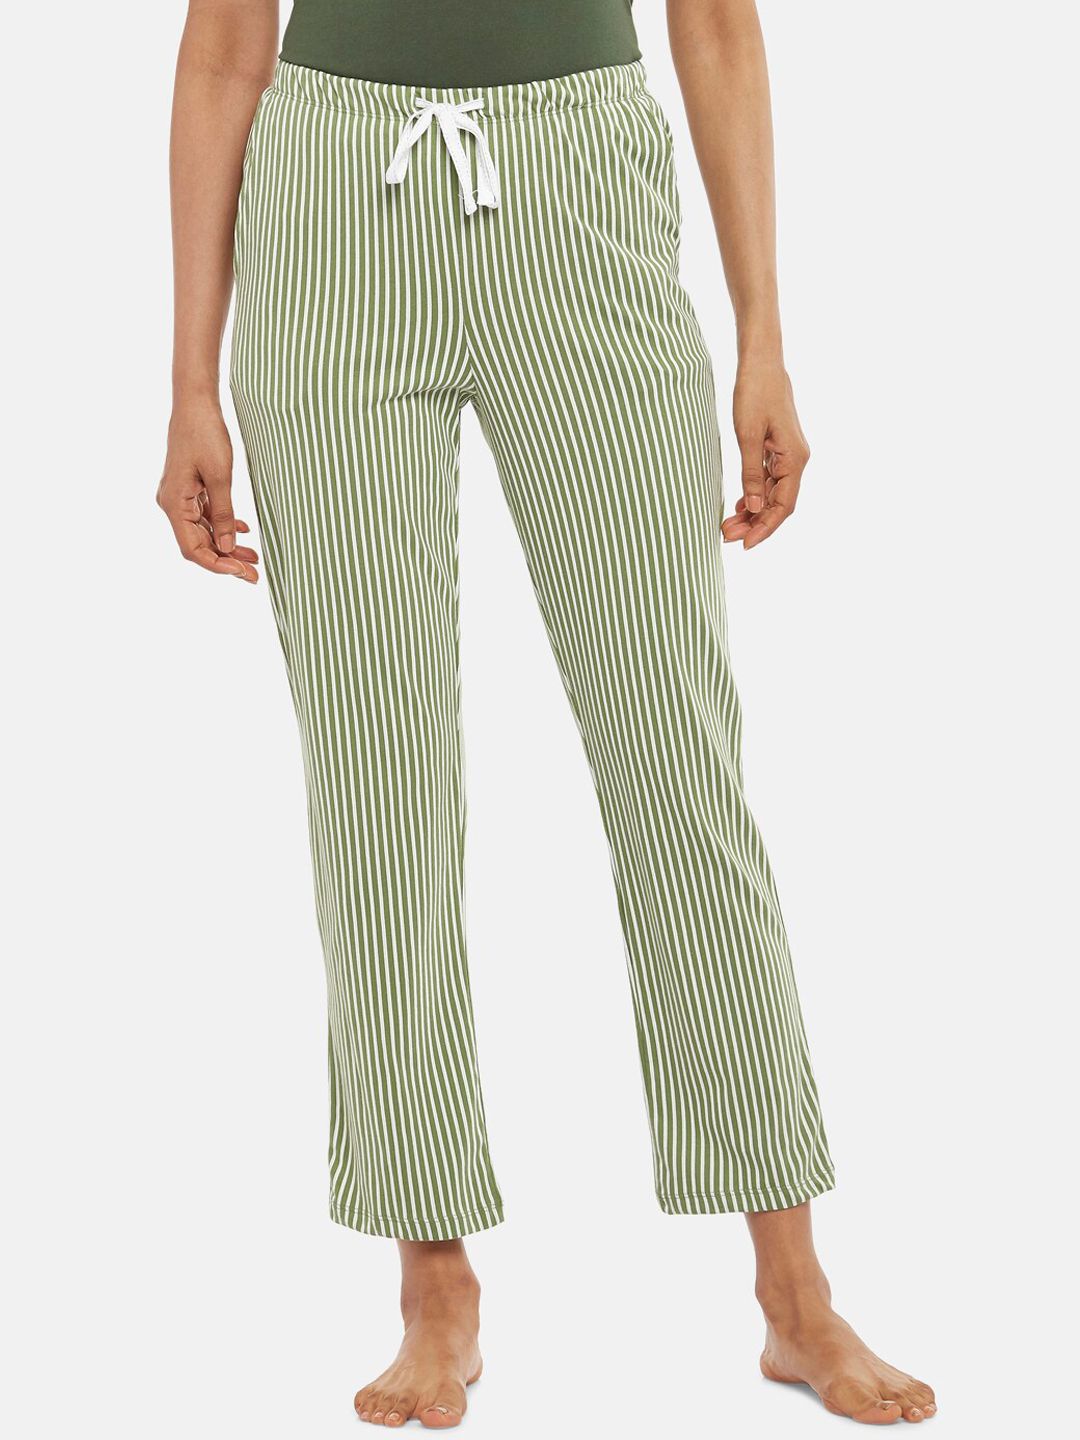 Dreamz by Pantaloons Women Green & White Striped Lounge Pants Price in India